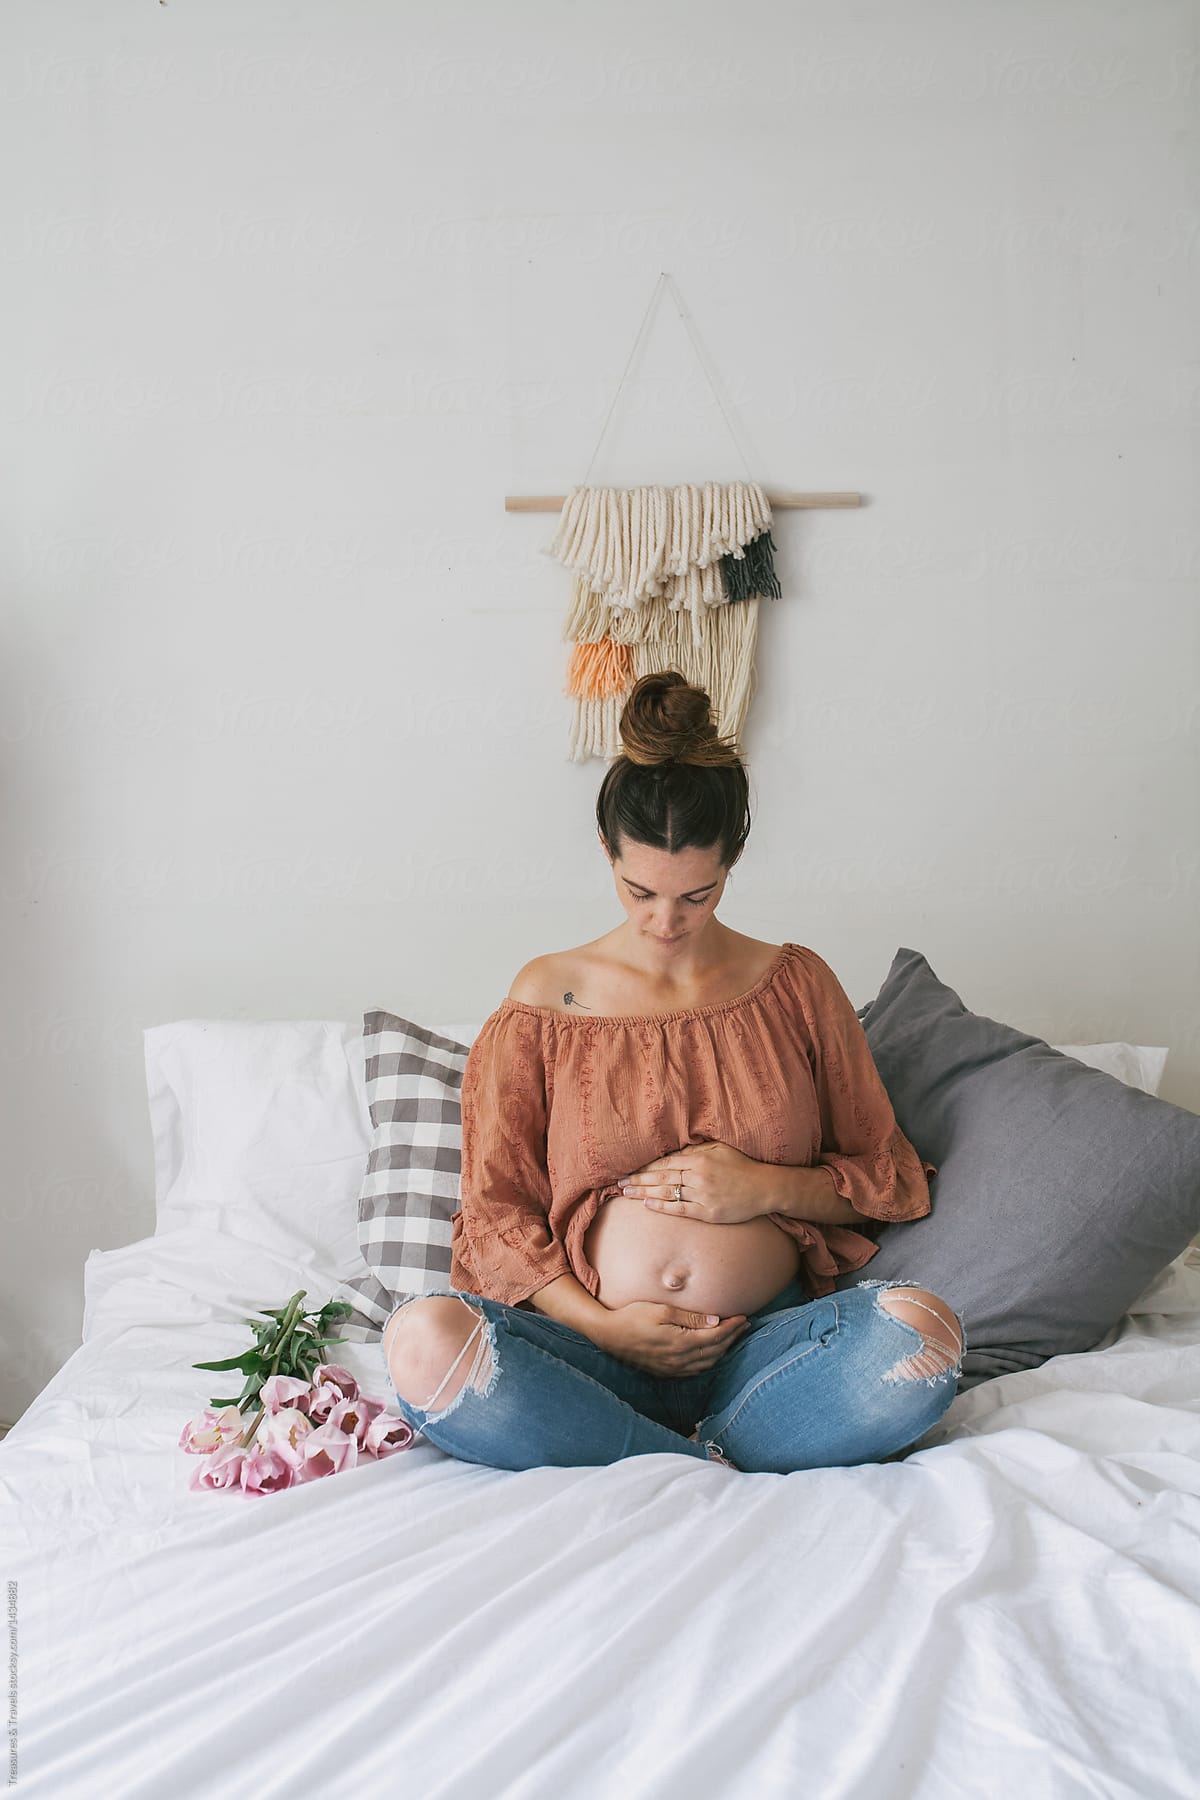 Pregnancy Photos On A Bed By Stocksy Contributor Pink House Organics Stocksy